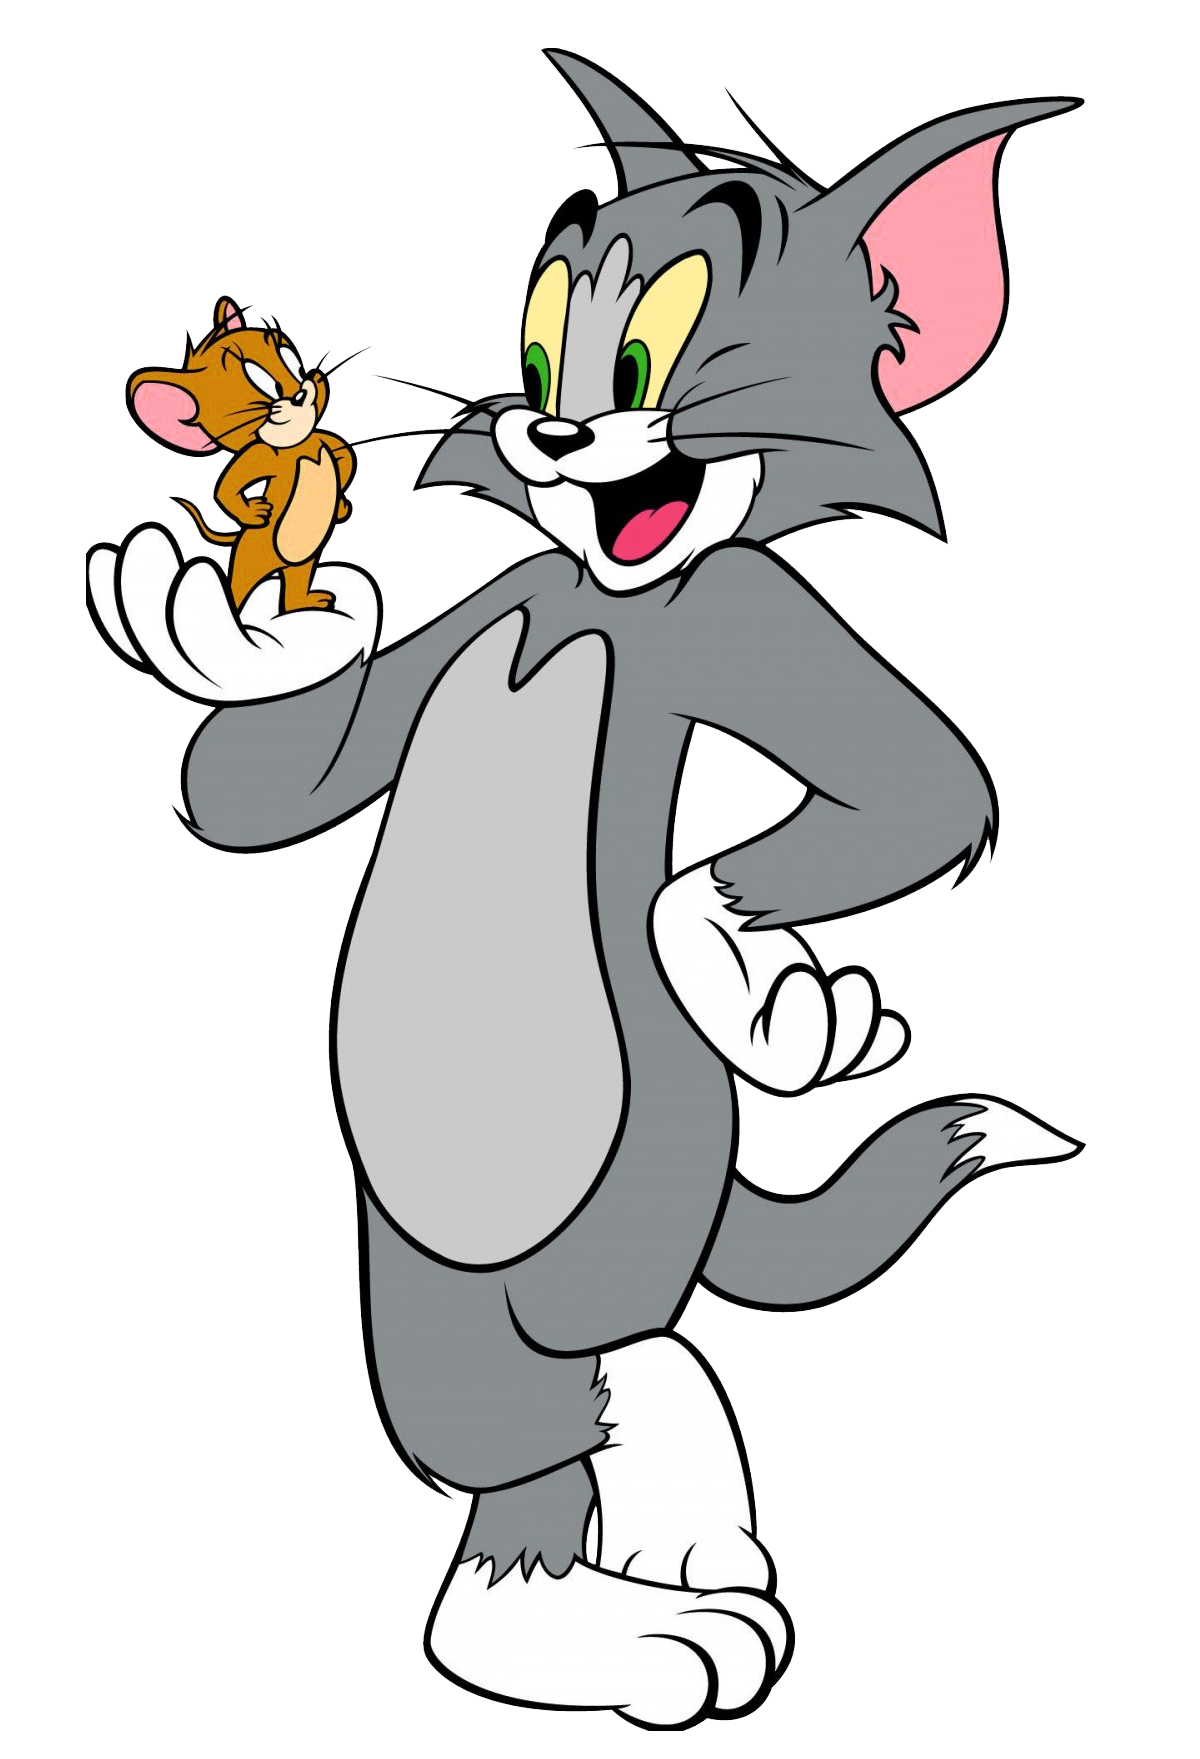 Worry clipart animated. Tom and jerry png